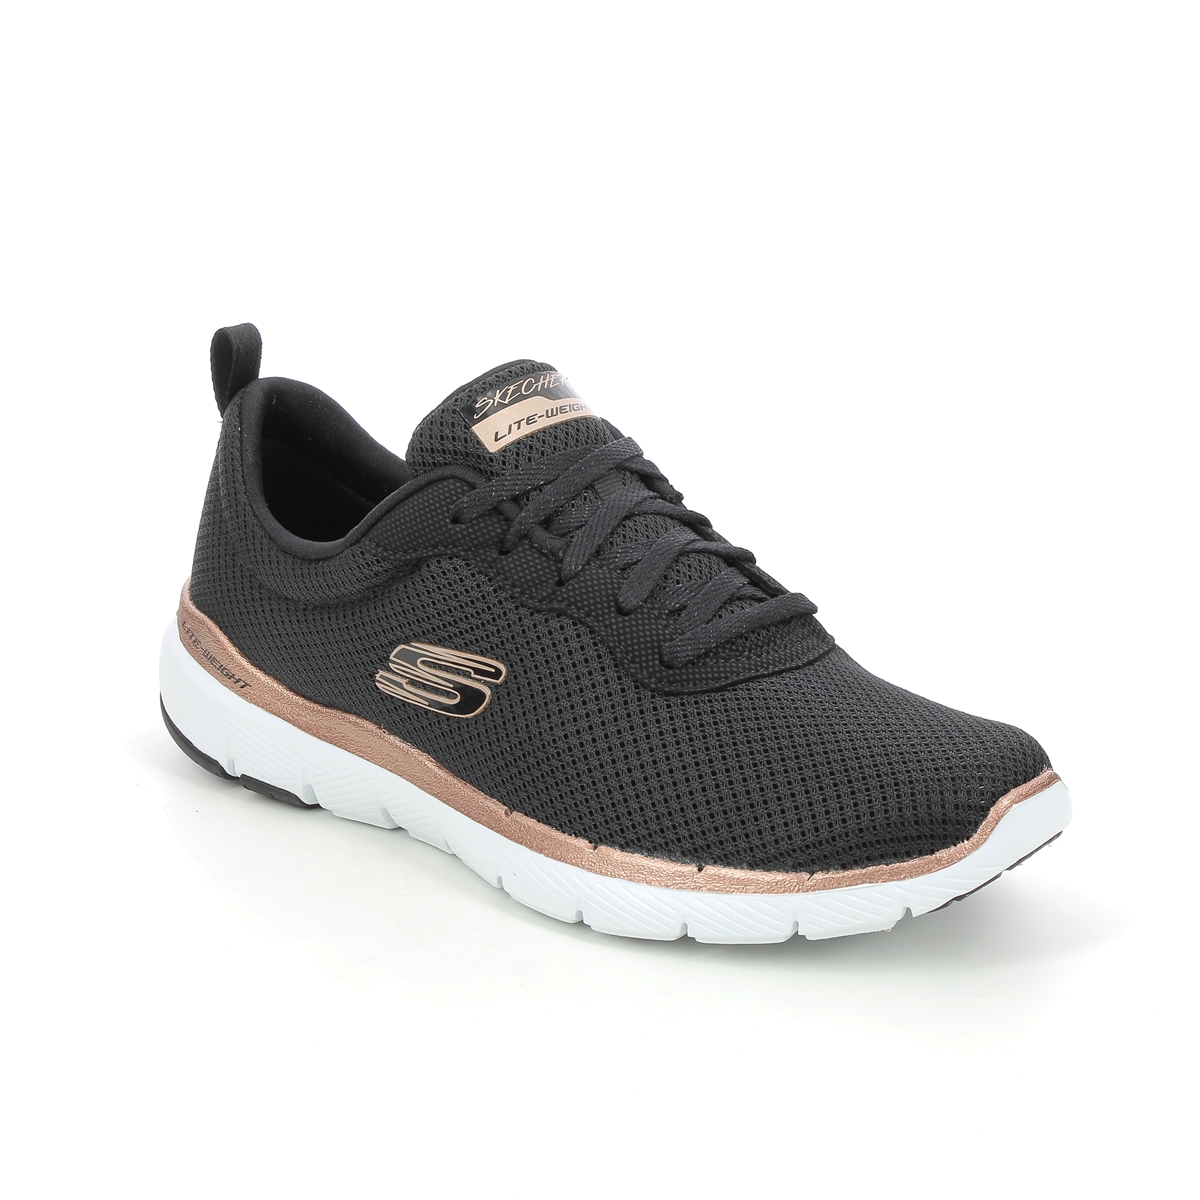 Skechers First Insight Black Rose Gold Womens Trainers 13070 In Size 7 In Plain Black Rose Gold